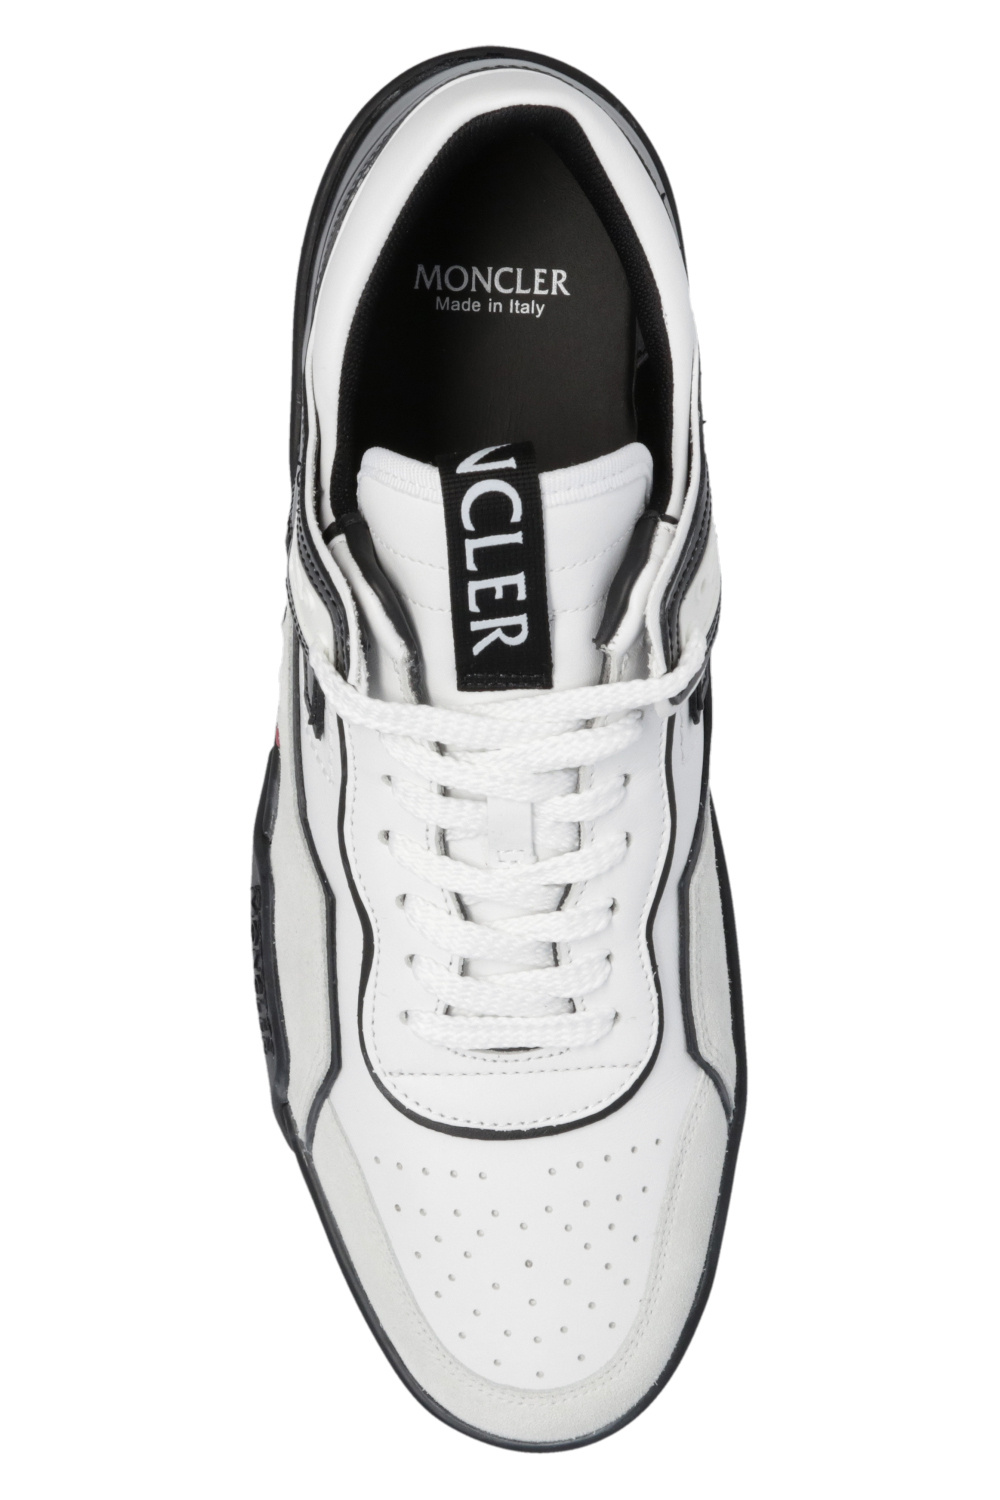 Moncler ‘Promyx Space’ sneakers